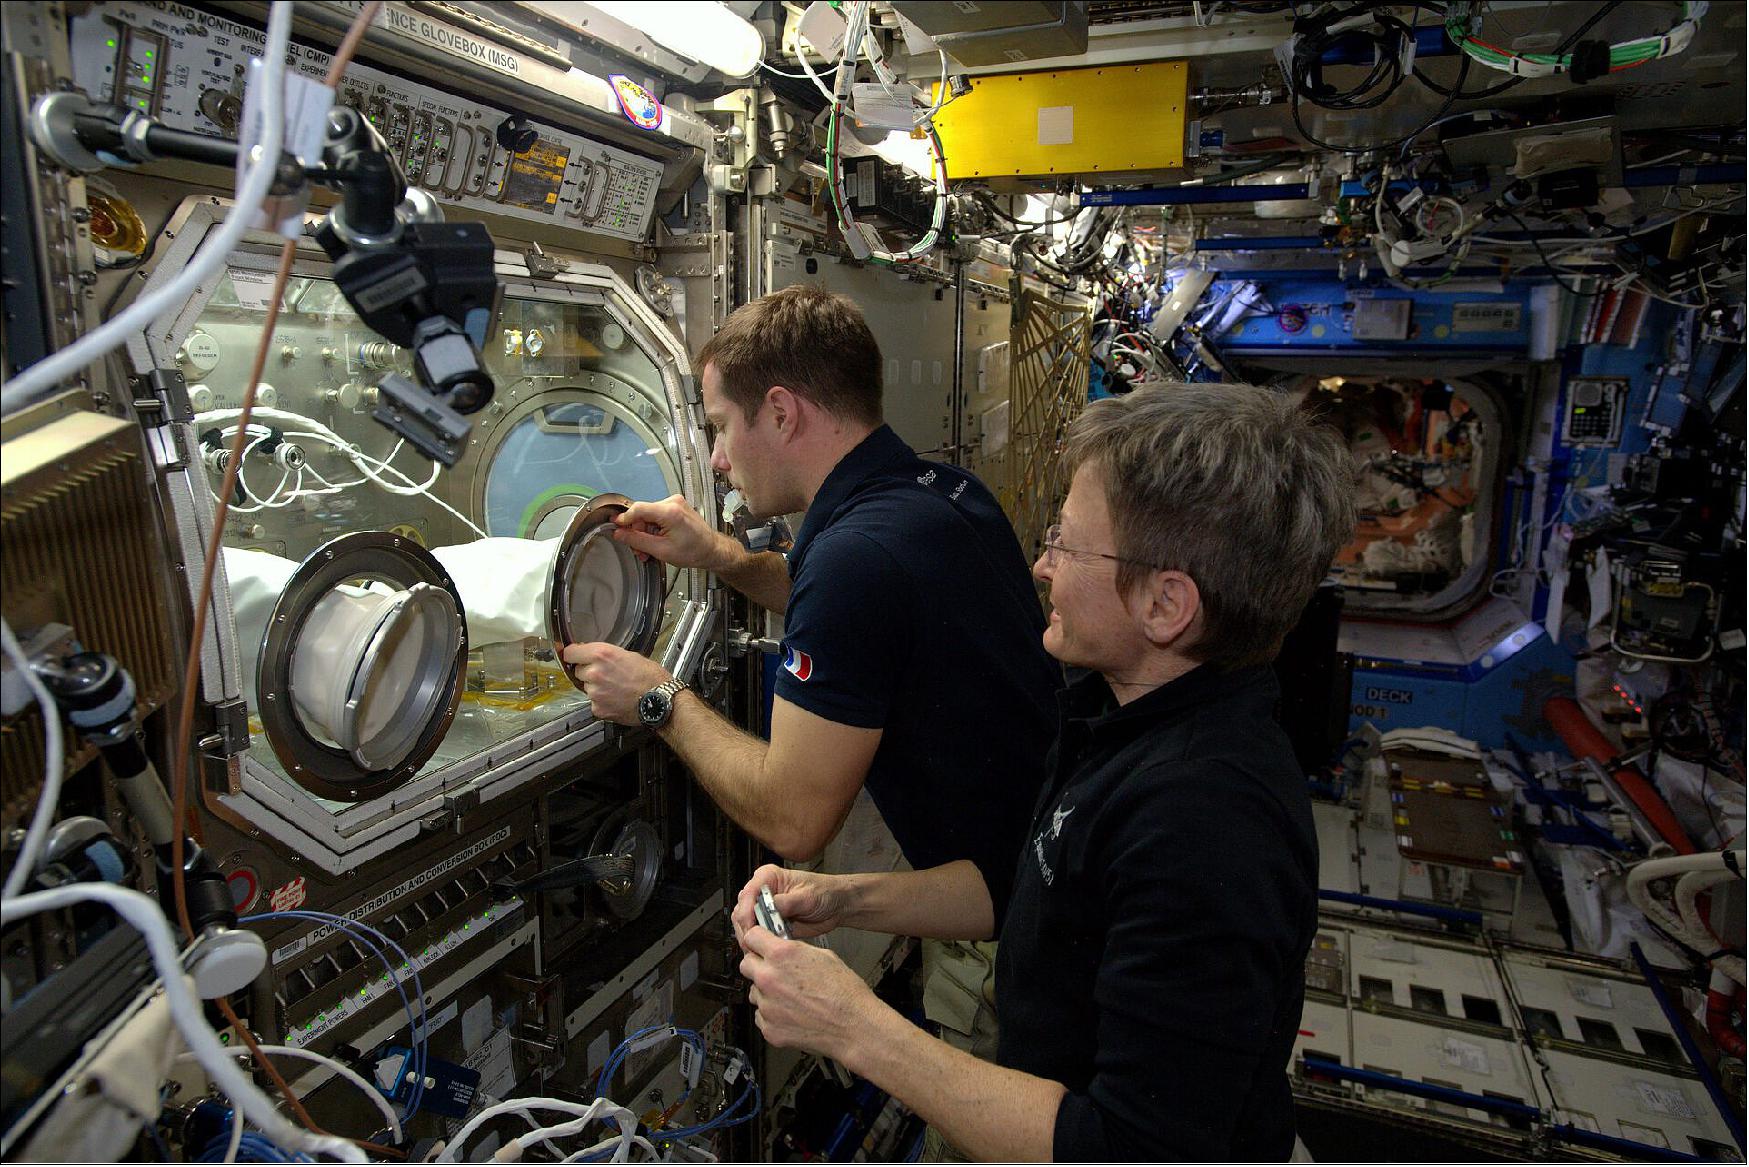 Figure 76: The gloves are the access points through which astronauts manipulate experiments, in the field of material science, biotechnology, fluid science, combustion science and crystal growth research (image credit: ESA/NASA)